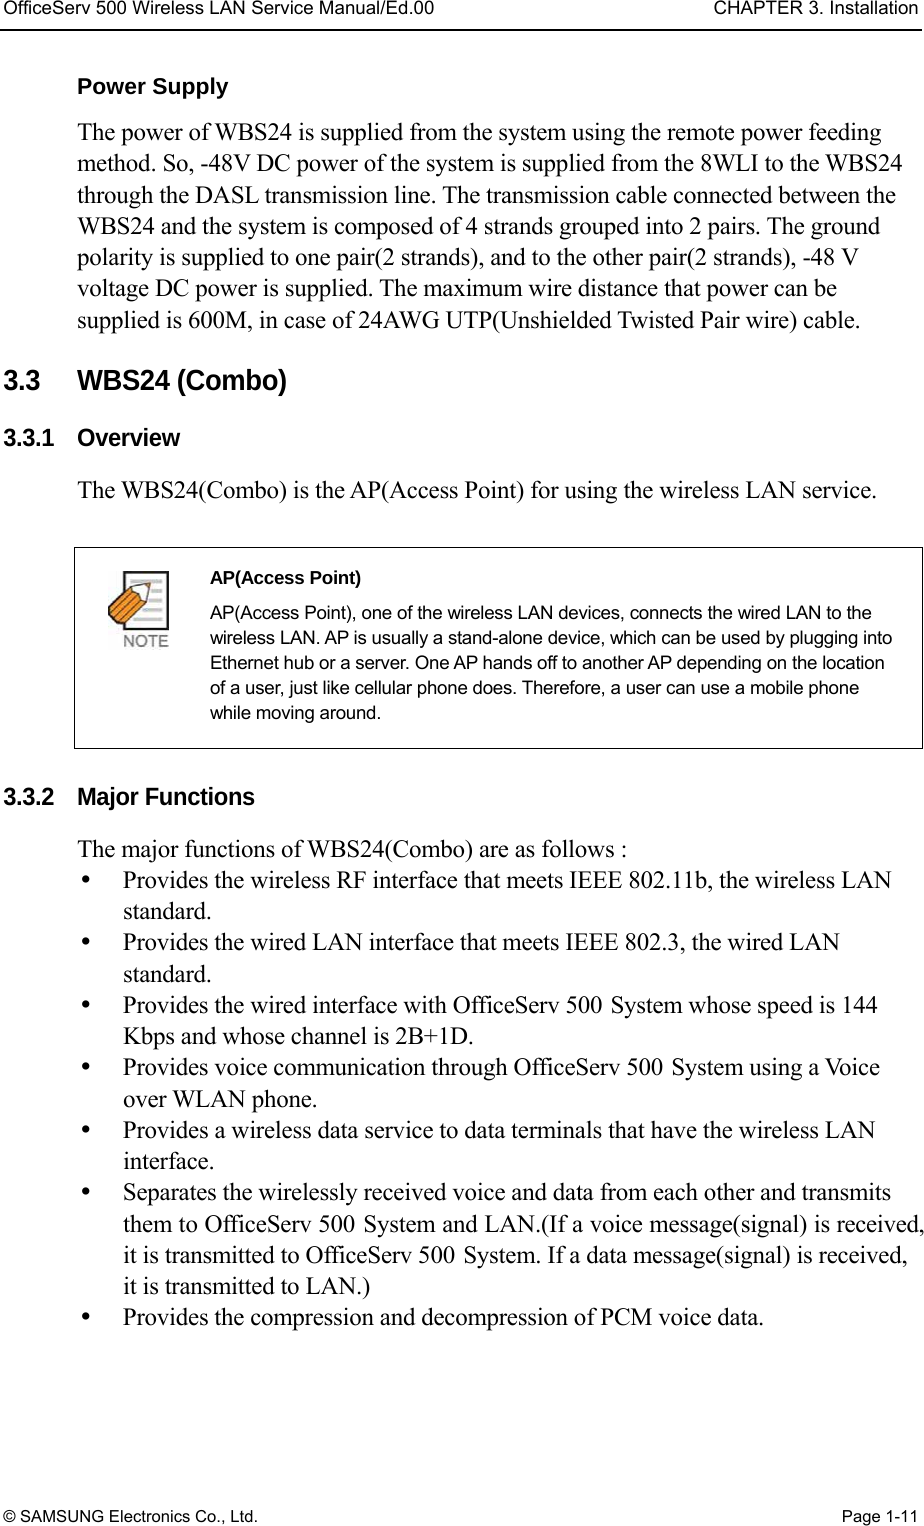 OfficeServ 500 Wireless LAN Service Manual/Ed.00  CHAPTER 3. Installation © SAMSUNG Electronics Co., Ltd.  Page 1-11 Power Supply The power of WBS24 is supplied from the system using the remote power feeding method. So, -48V DC power of the system is supplied from the 8WLI to the WBS24 through the DASL transmission line. The transmission cable connected between the WBS24 and the system is composed of 4 strands grouped into 2 pairs. The ground polarity is supplied to one pair(2 strands), and to the other pair(2 strands), -48 V voltage DC power is supplied. The maximum wire distance that power can be supplied is 600M, in case of 24AWG UTP(Unshielded Twisted Pair wire) cable.  3.3   WBS24 (Combo) 3.3.1 Overview The WBS24(Combo) is the AP(Access Point) for using the wireless LAN service.     AP(Access Point)   AP(Access Point), one of the wireless LAN devices, connects the wired LAN to the wireless LAN. AP is usually a stand-alone device, which can be used by plugging into Ethernet hub or a server. One AP hands off to another AP depending on the location of a user, just like cellular phone does. Therefore, a user can use a mobile phone while moving around.  3.3.2 Major Functions The major functions of WBS24(Combo) are as follows :   Provides the wireless RF interface that meets IEEE 802.11b, the wireless LAN standard.   Provides the wired LAN interface that meets IEEE 802.3, the wired LAN standard.   Provides the wired interface with OfficeServ 500 System whose speed is 144 Kbps and whose channel is 2B+1D.     Provides voice communication through OfficeServ 500 System using a Voice over WLAN phone.     Provides a wireless data service to data terminals that have the wireless LAN interface.    Separates the wirelessly received voice and data from each other and transmits them to OfficeServ 500 System and LAN.(If a voice message(signal) is received, it is transmitted to OfficeServ 500 System. If a data message(signal) is received, it is transmitted to LAN.)     Provides the compression and decompression of PCM voice data. 